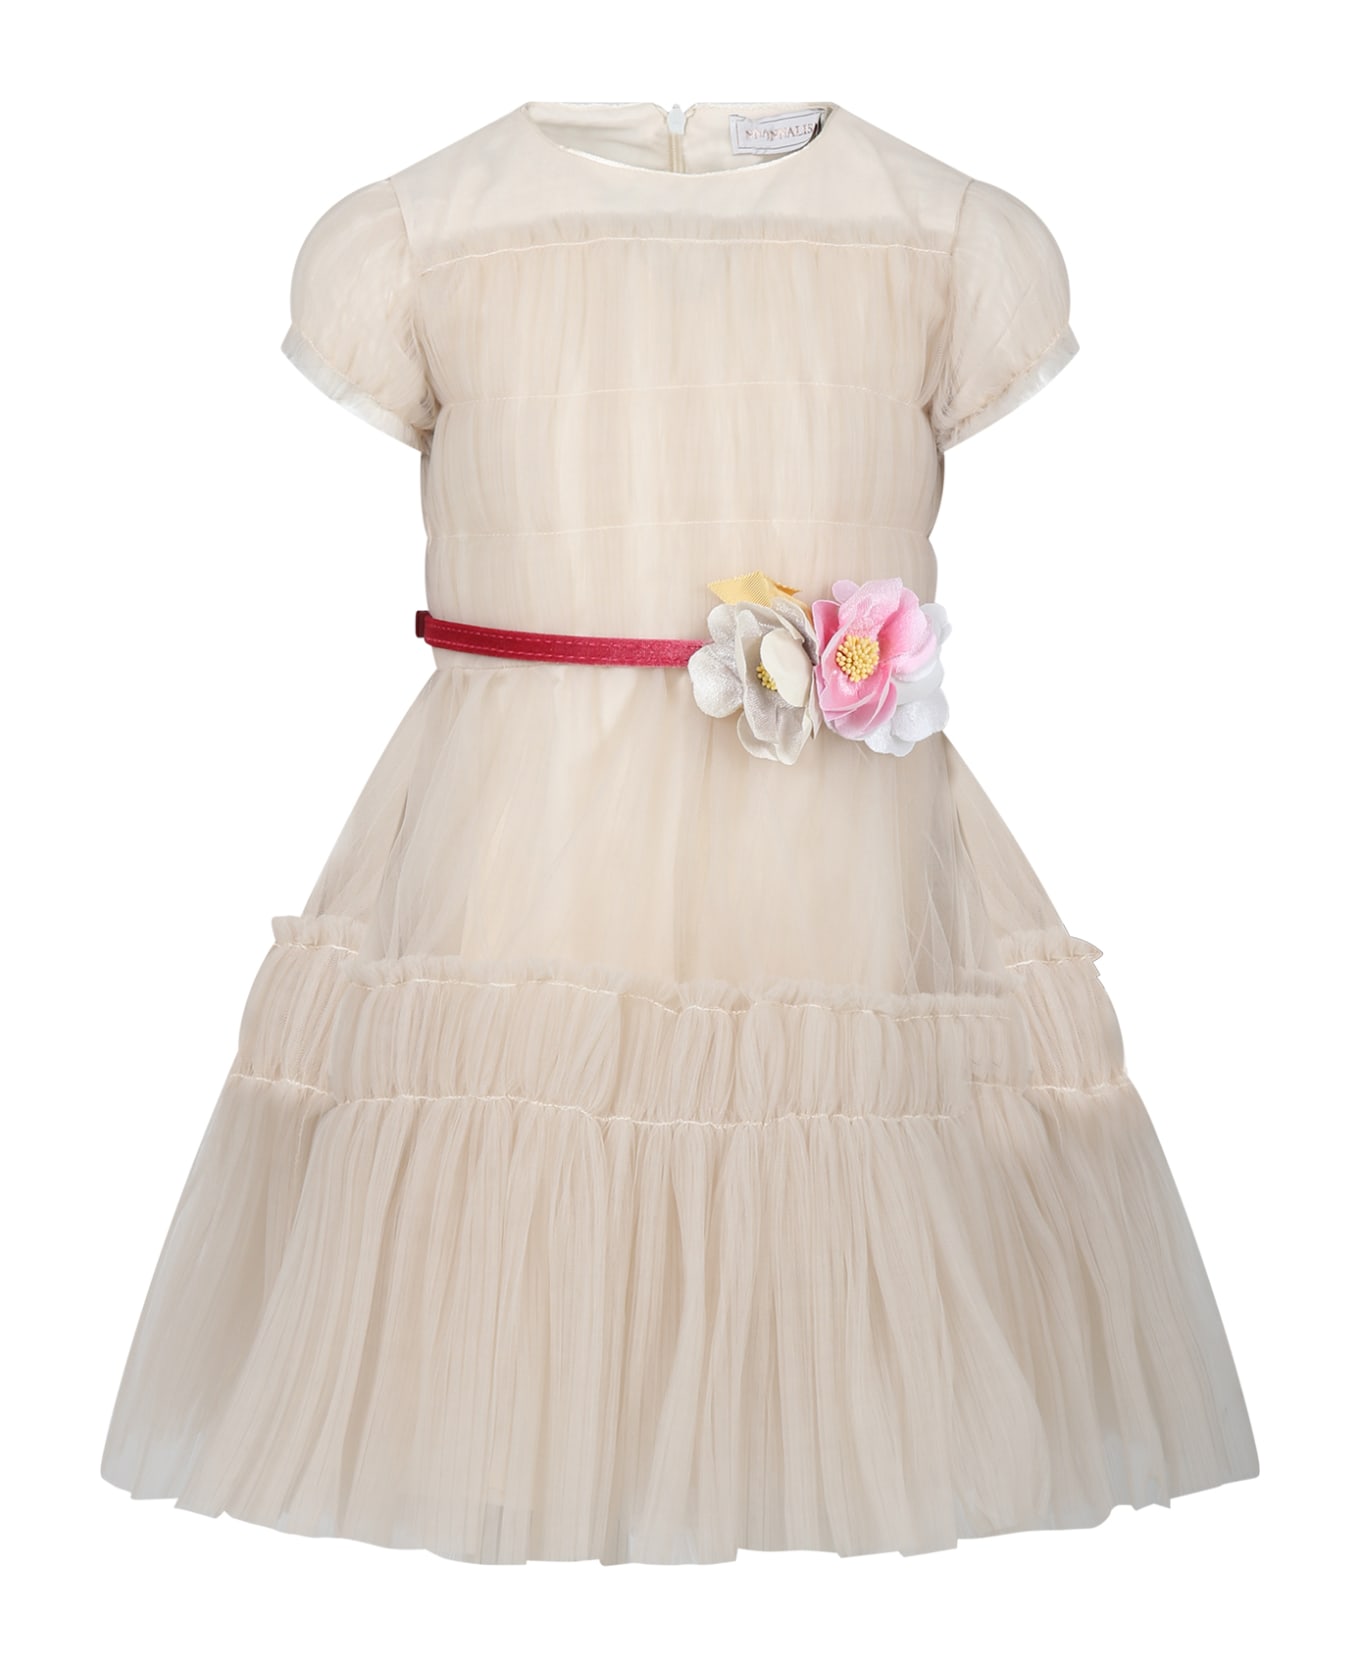 Monnalisa Ivory Dress For Girl With Flowers - Ivory